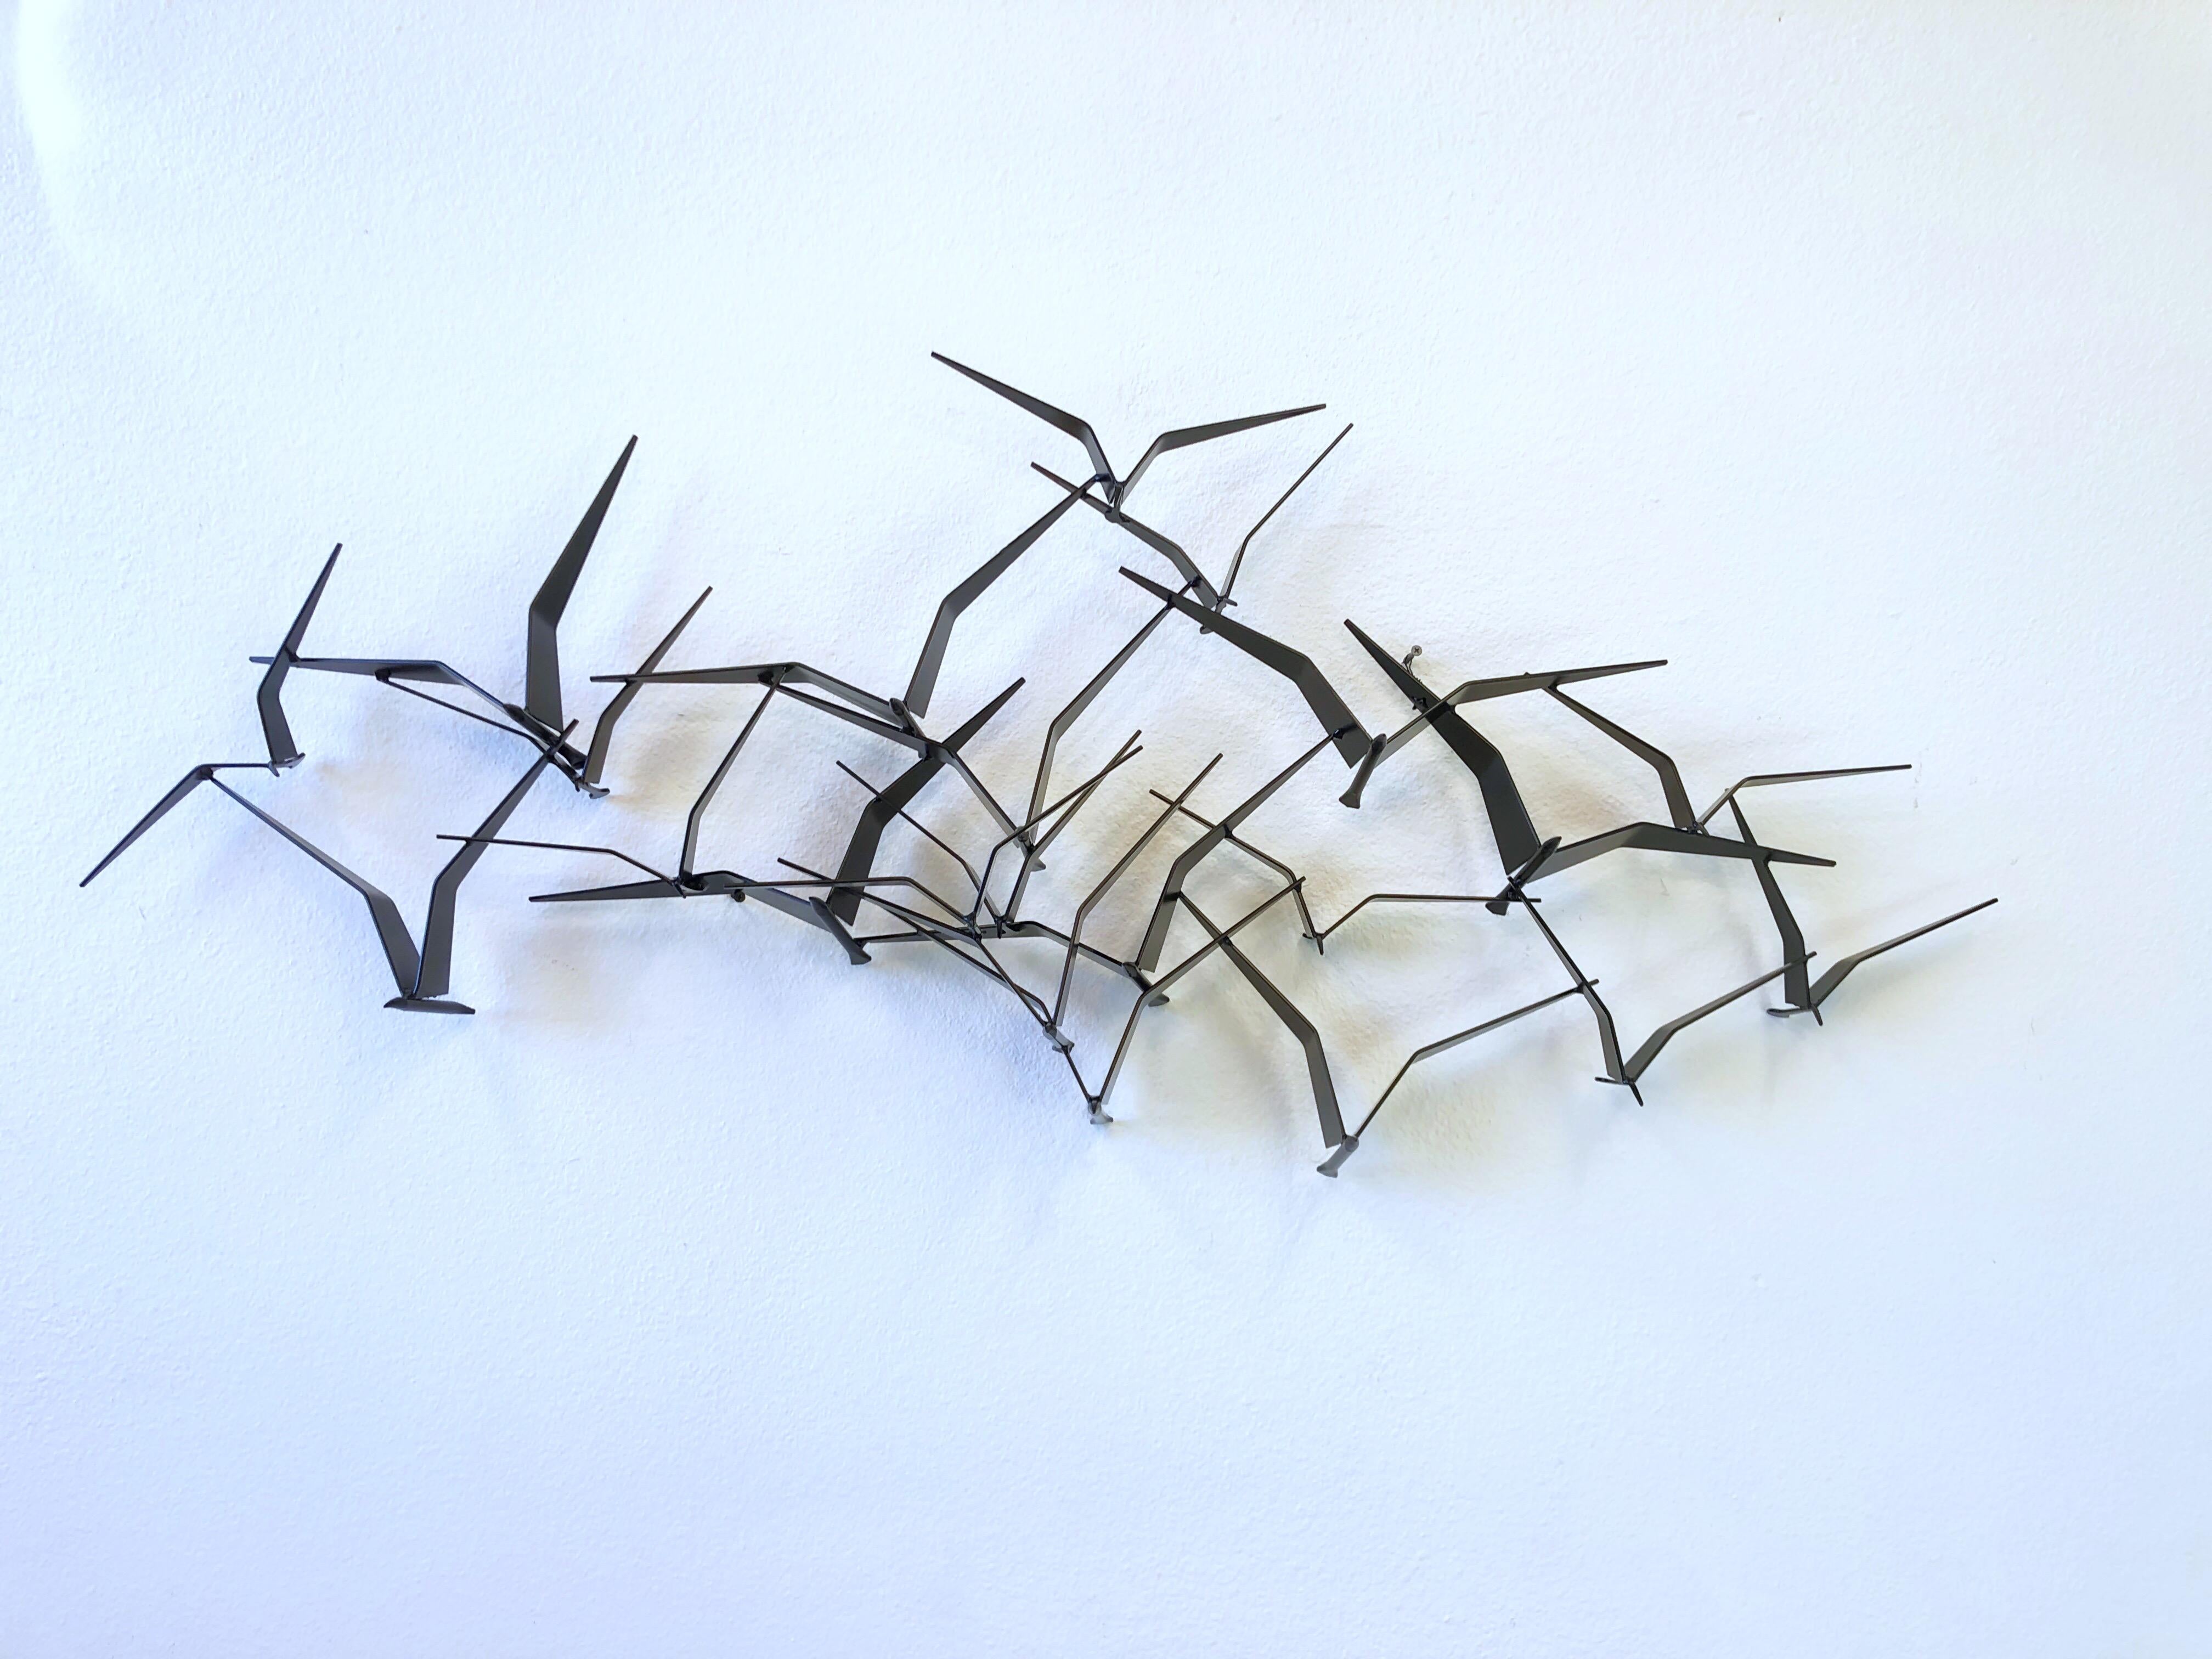 Iconic 1970’s flock of bird wall sculpture by Curtis Jeré. 
Newly black powder coated. 
This was hanging in a wall outdoor for many years, so the signature is gone. 

Measurements: 56” Wide, 24” High, 7.25” Deep at center.